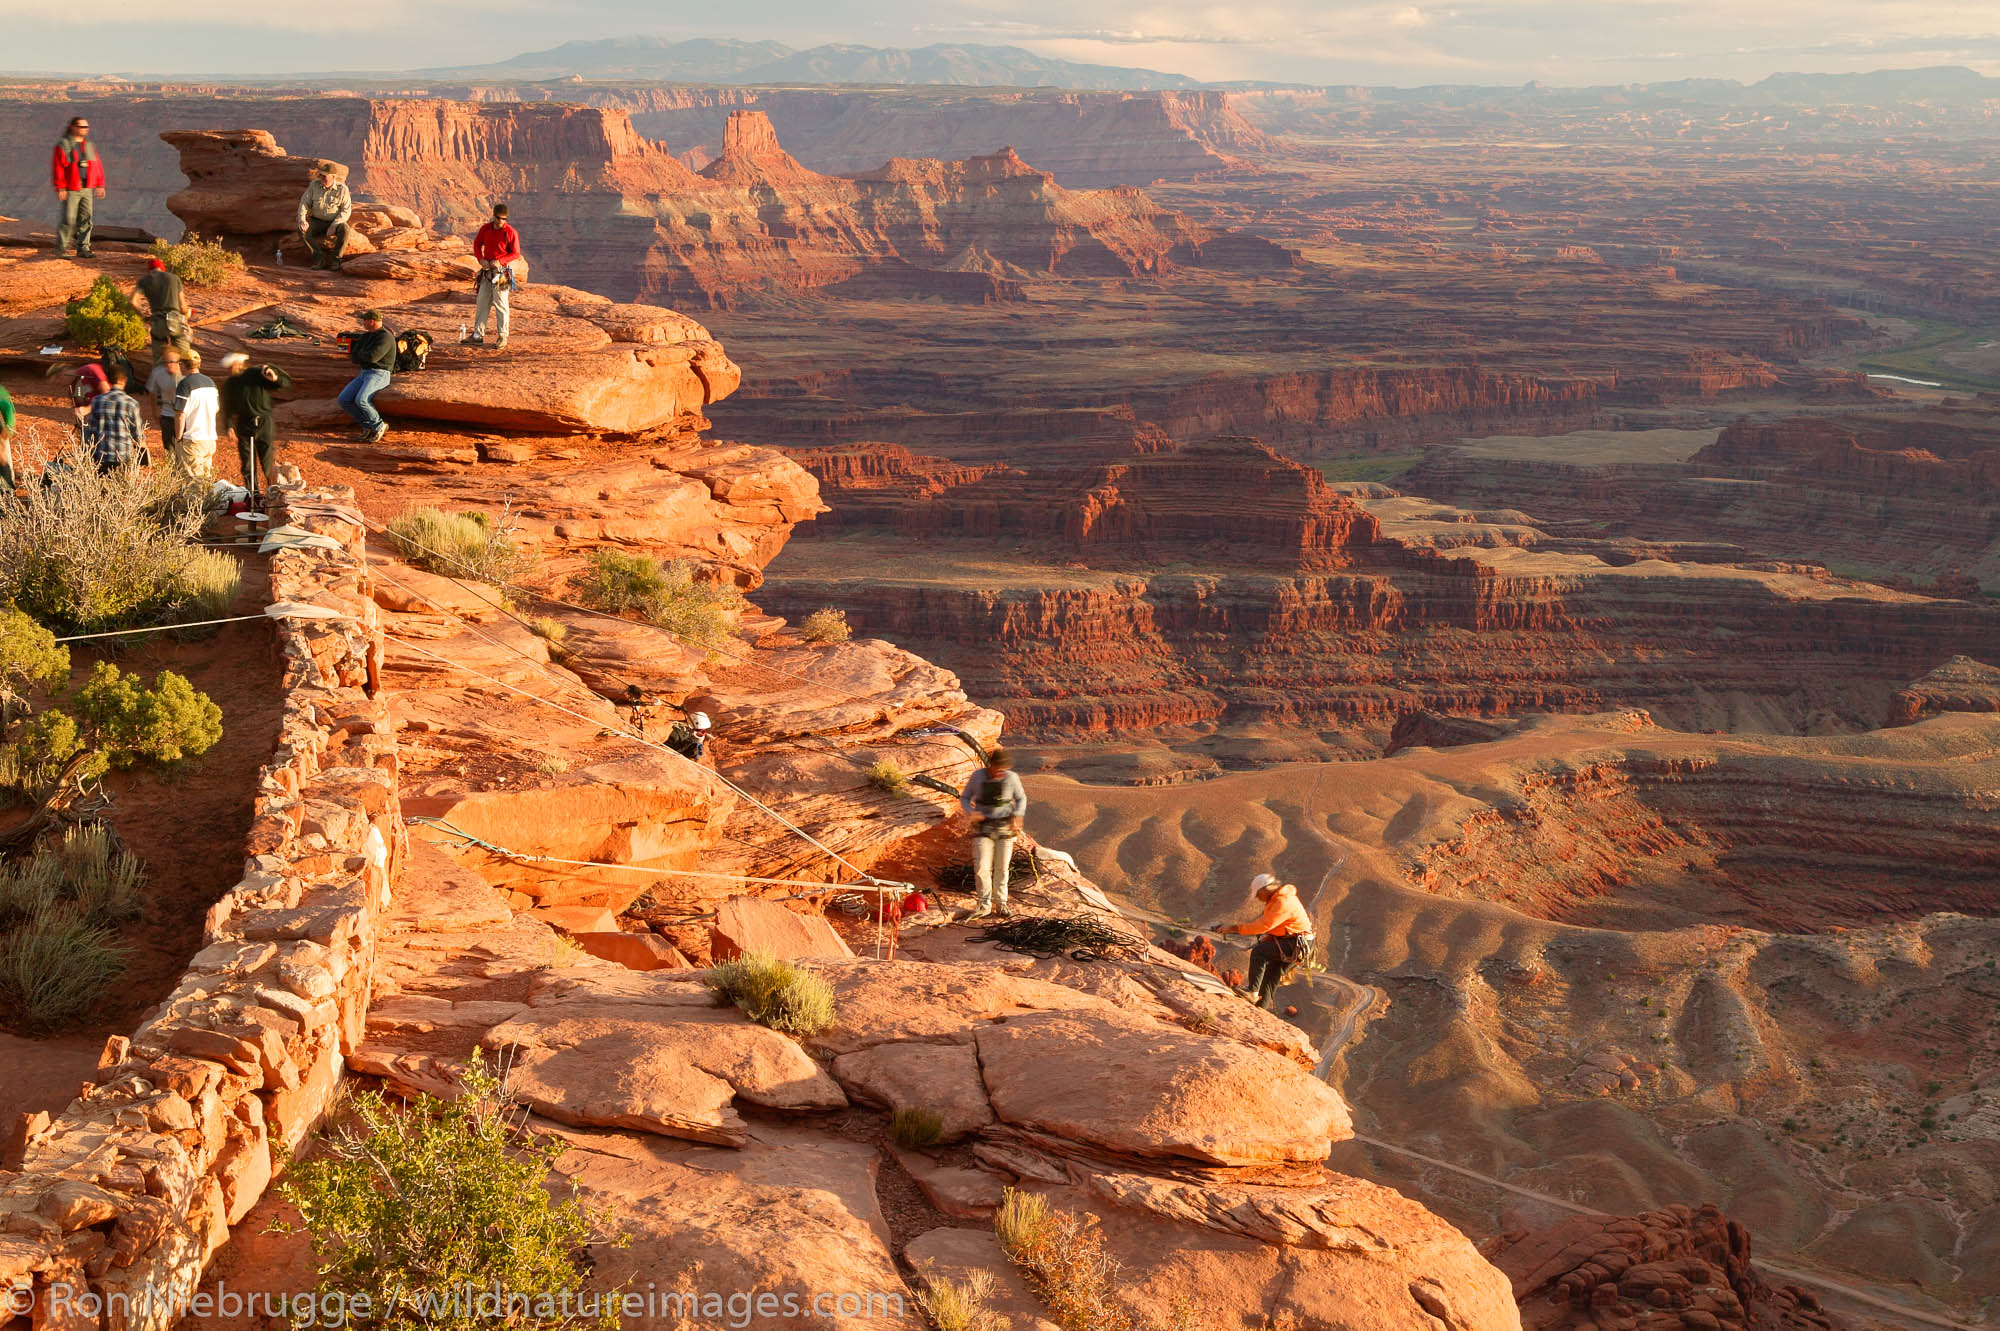 Rock climbers at the Dead Horse Point Overlook take part in a commercial shoot, Dead Horse Point State Park, near Moab, Utah.